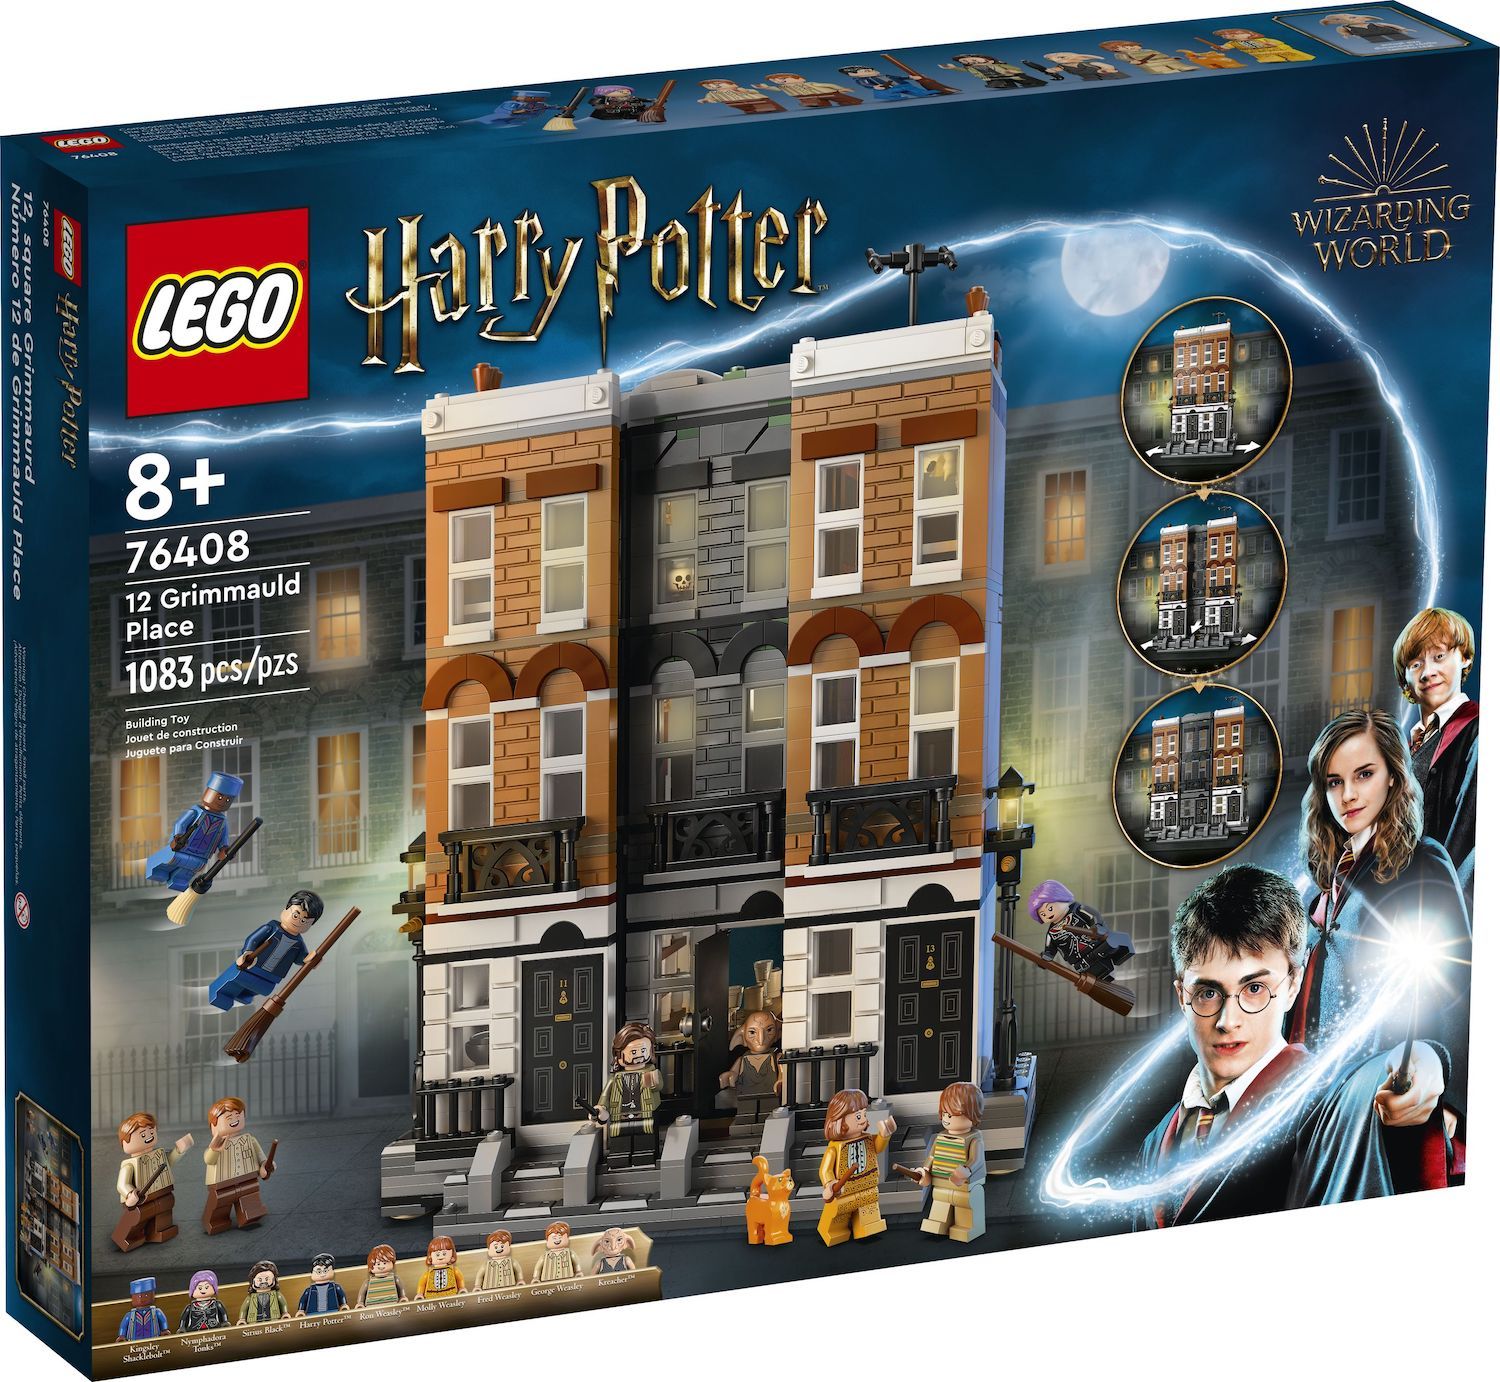 The Best LEGO Harry Potter Sets in 2022